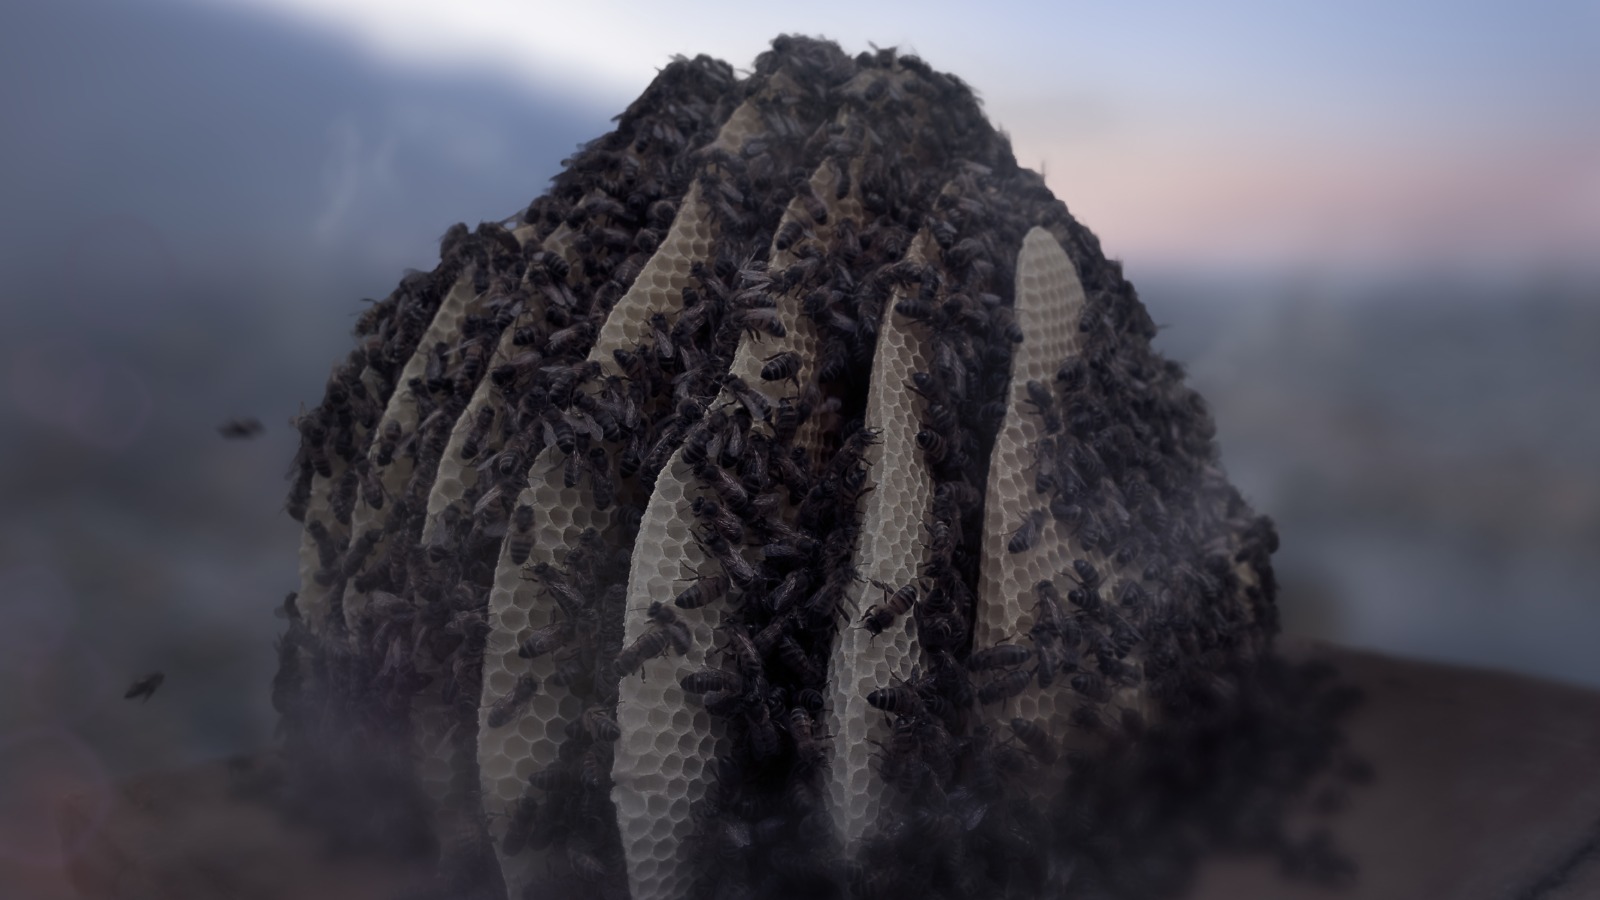 Still from documentary Conscious, which shows a close up of a bee hive with bees covering several honeycombs